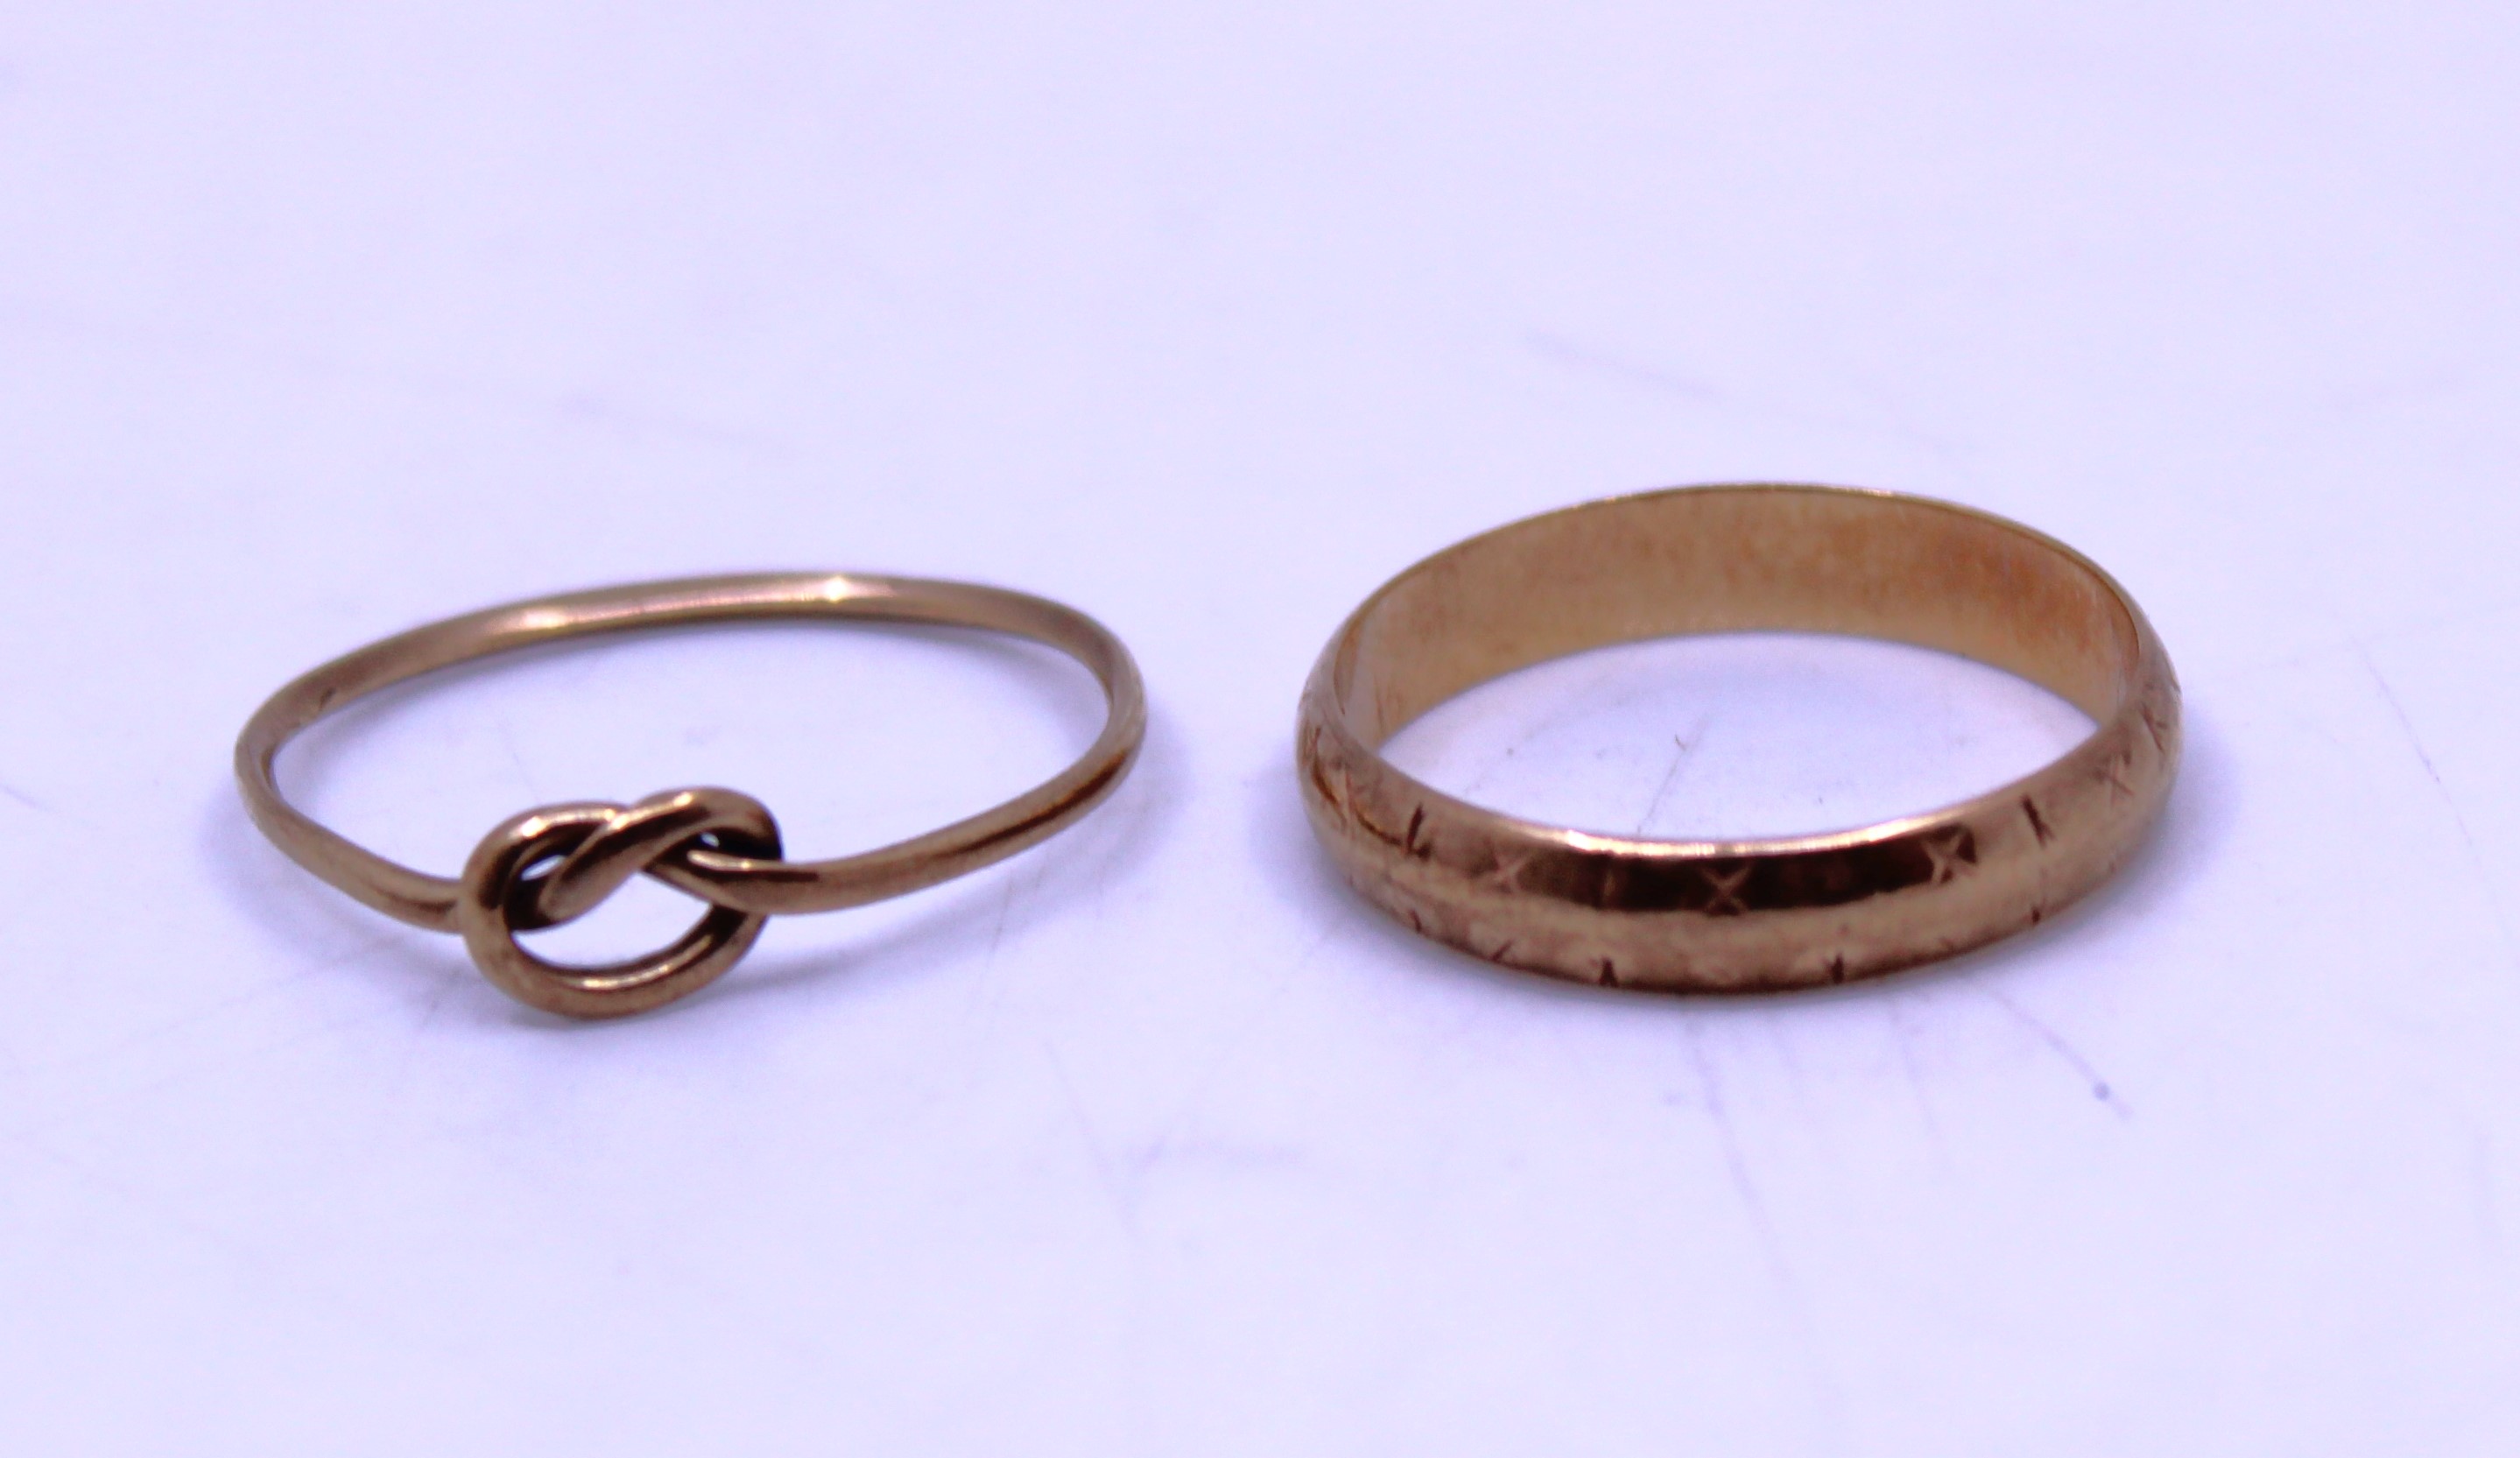 9ct Gold Wedding Band and 9ct Gold Knot Ring.   They are both hallmarked "375" for 9ct Gold.  The